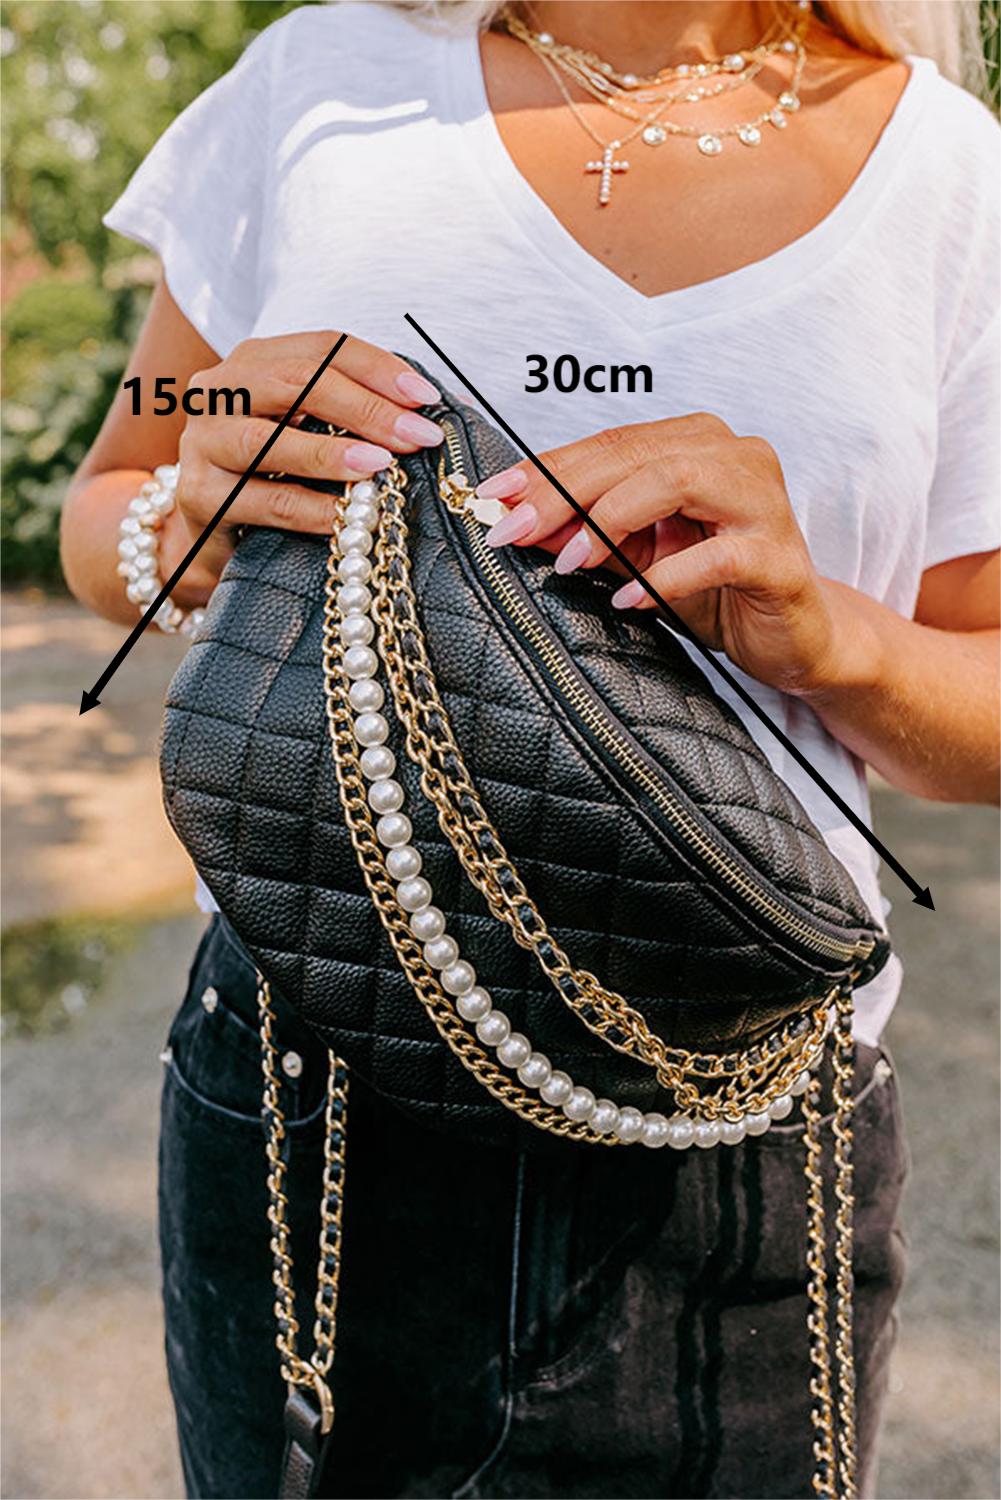 Black Faux Leather Quilted Crossbody Bag